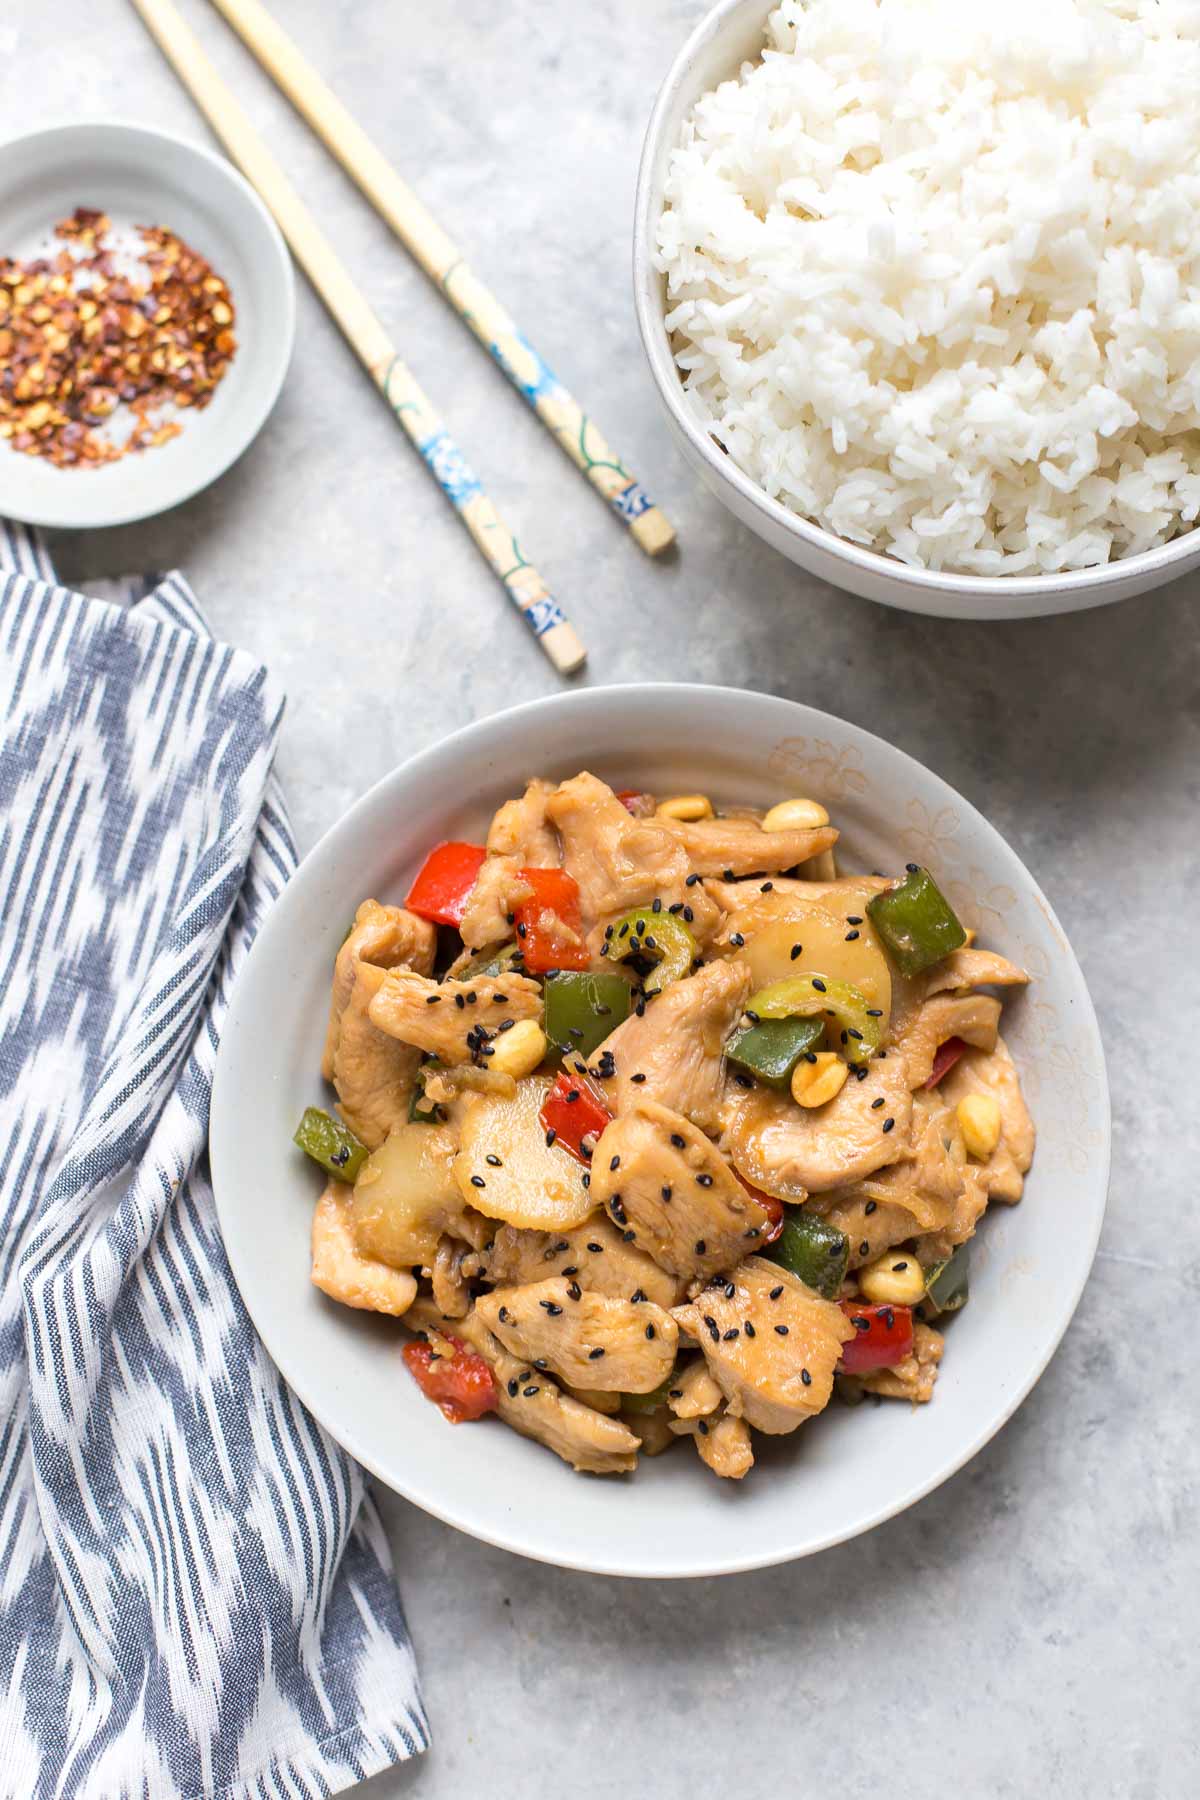 kung pao chicken on a small plate next to a bowl of rice and a small bowl of red pepper flakes